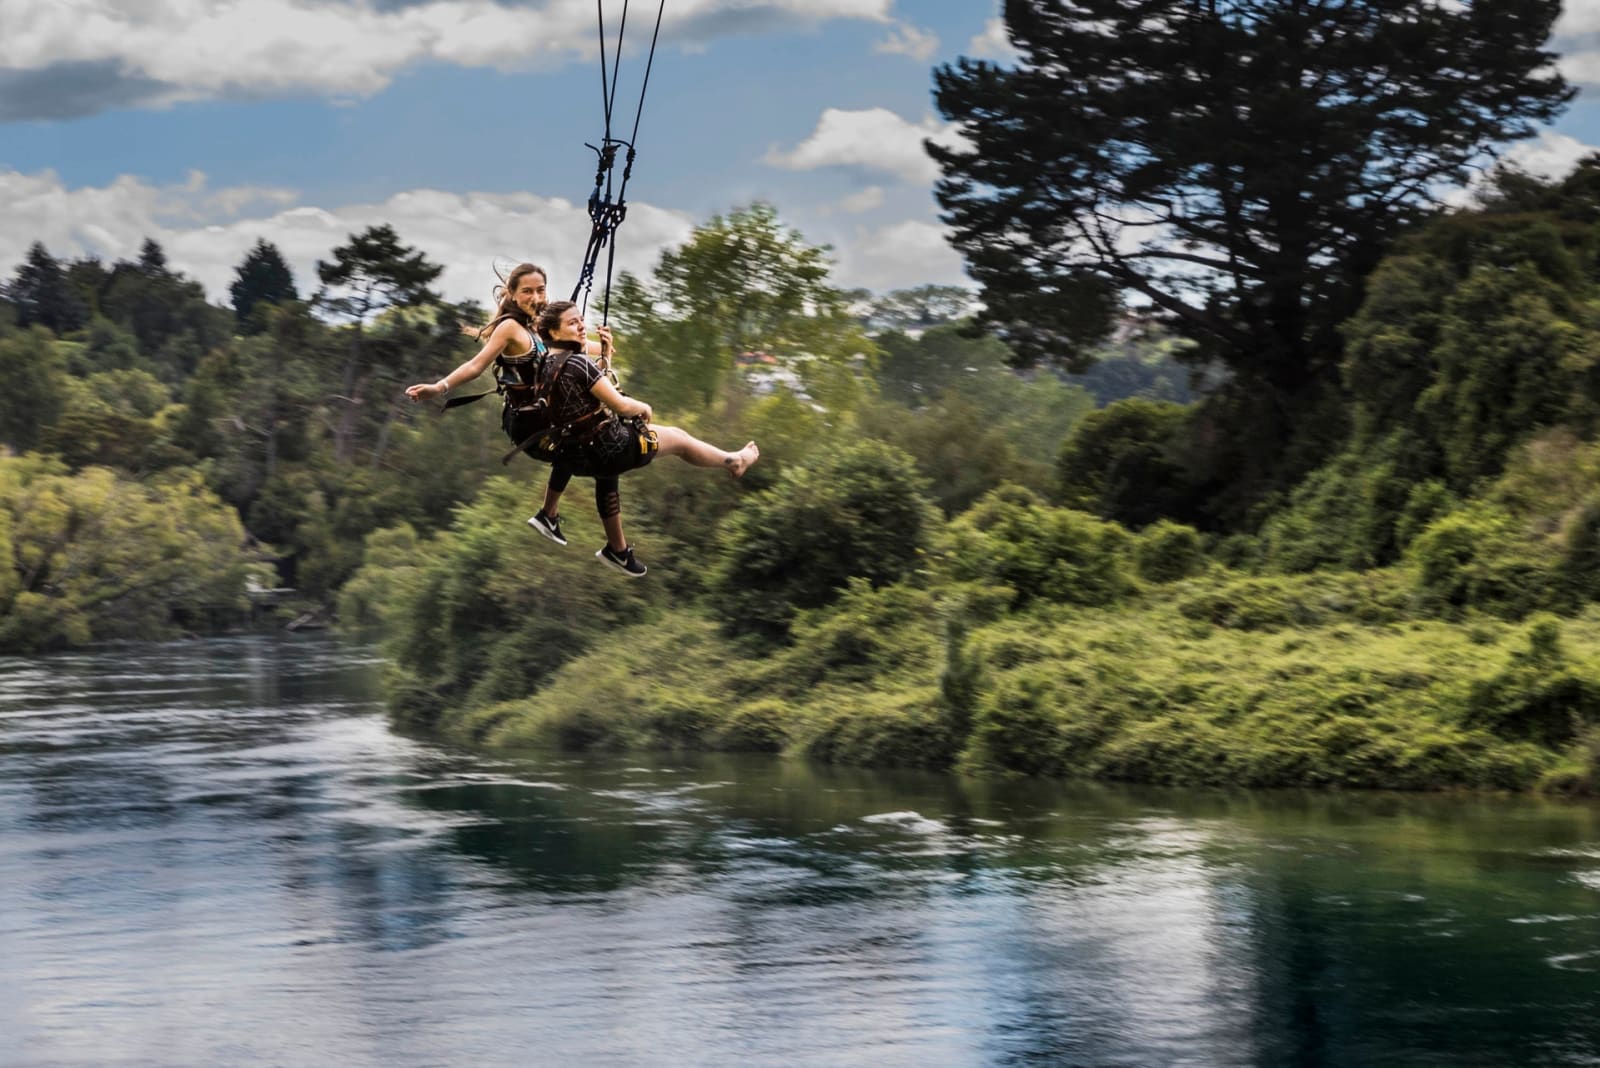 Bungy jumping in Taupo